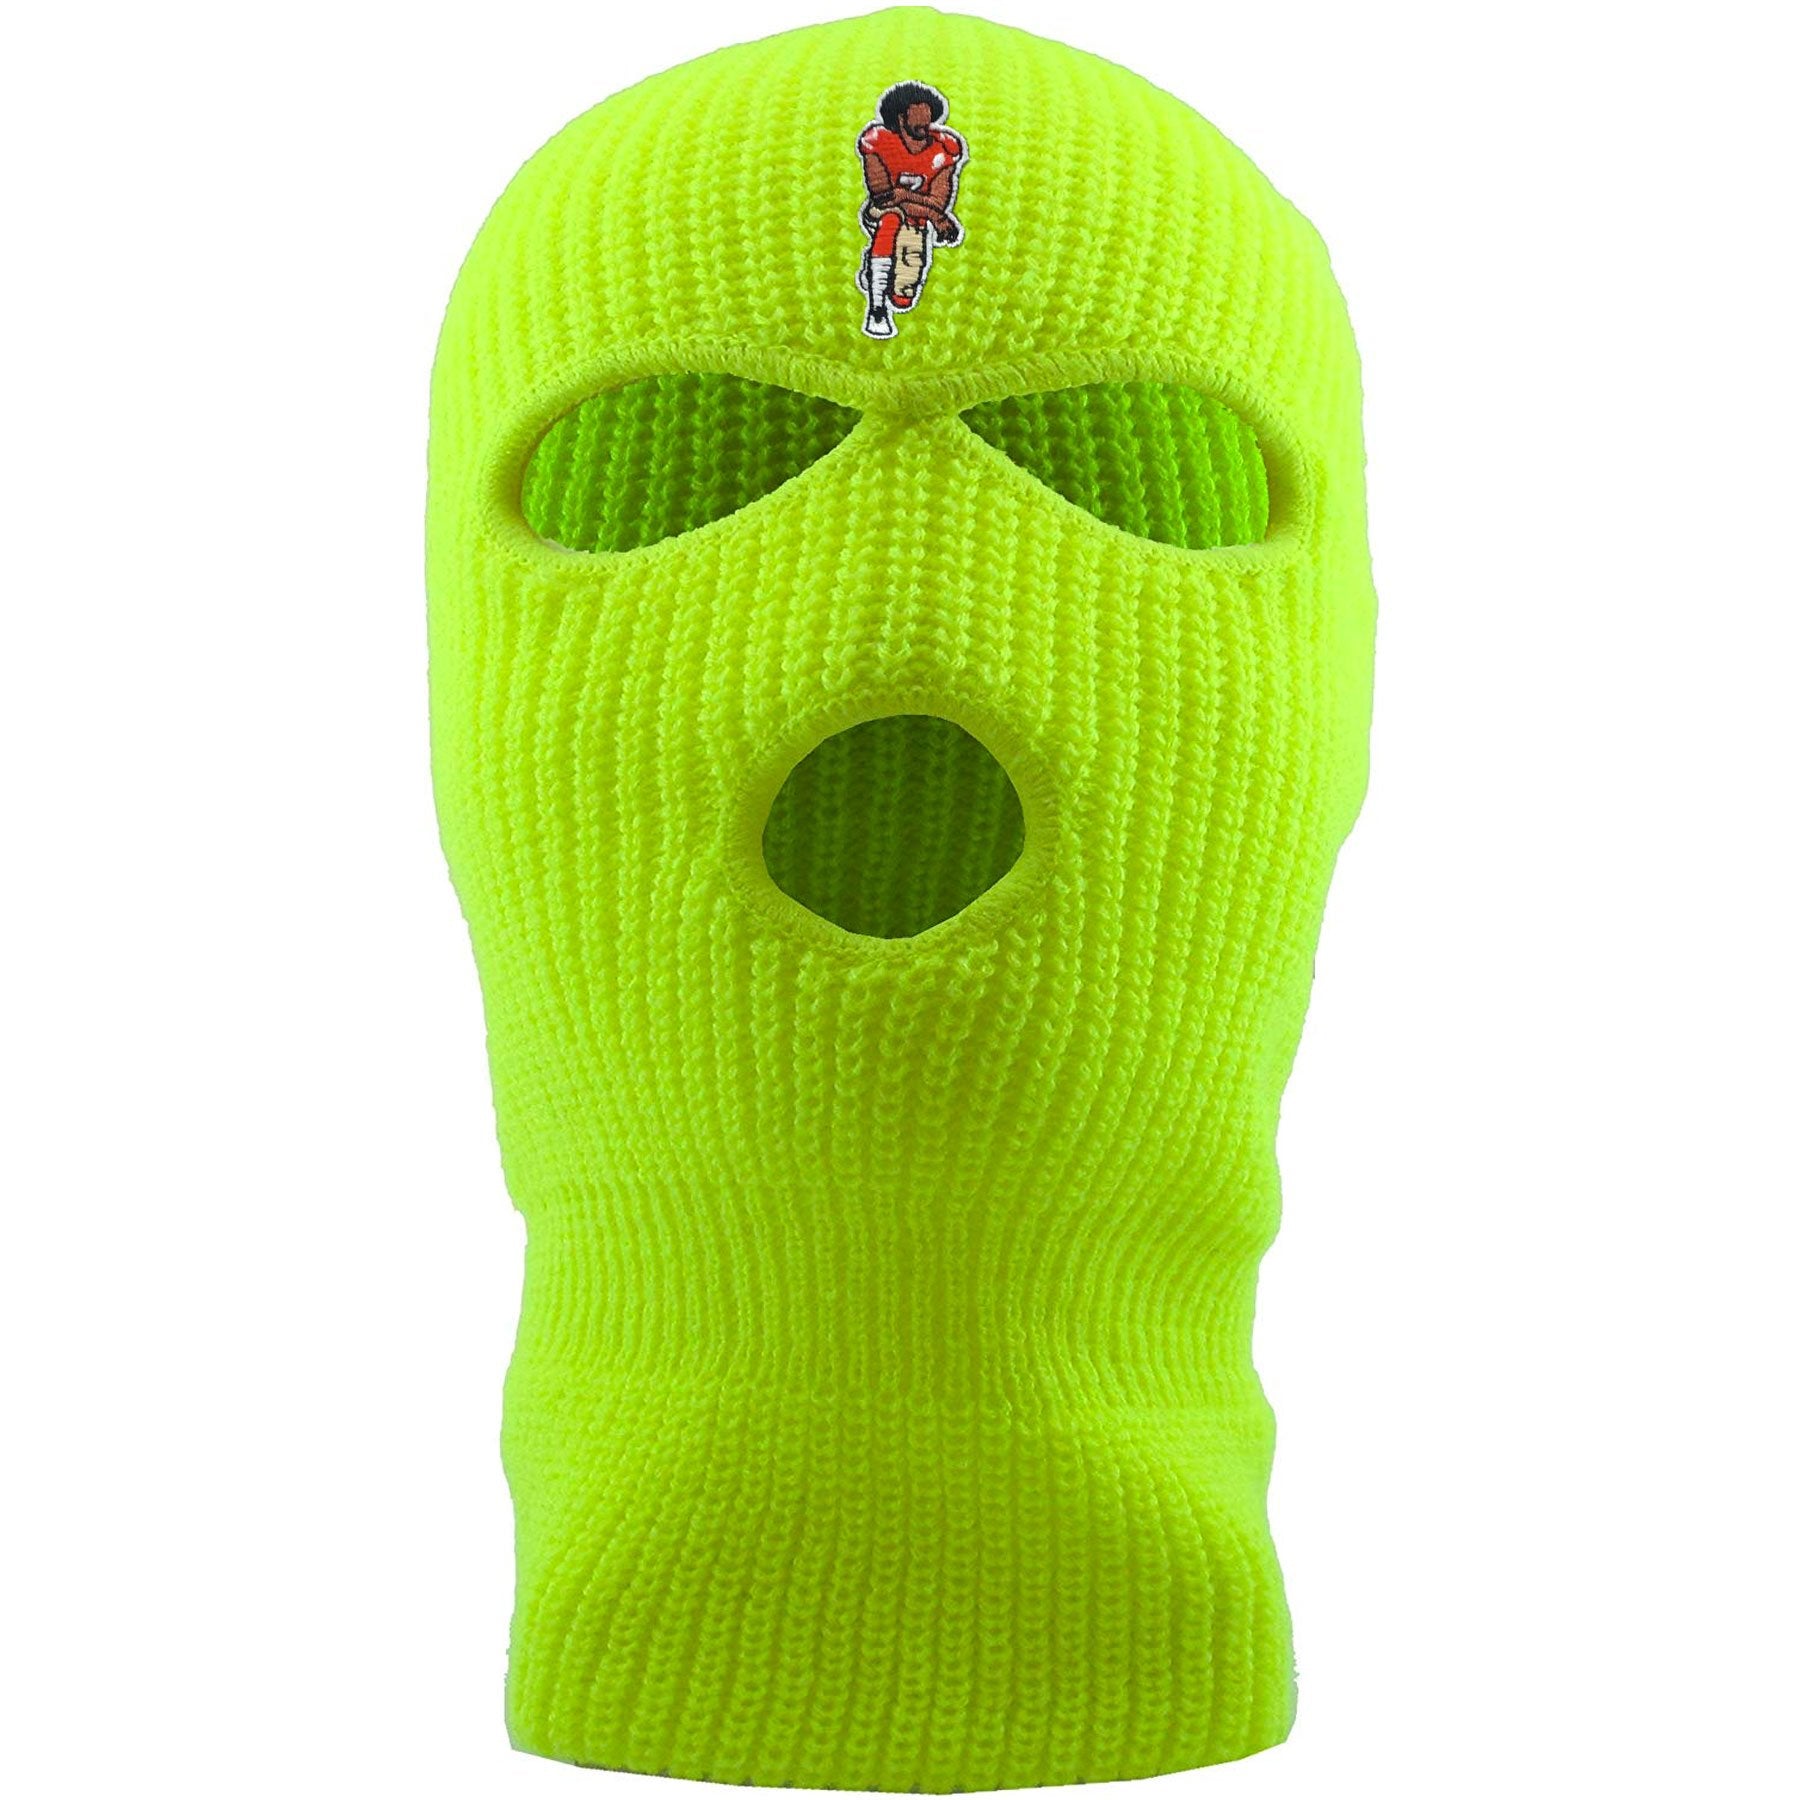 On the front of the kaepernick safety yellow ski mask is the colin kaepernick taking a knee logo